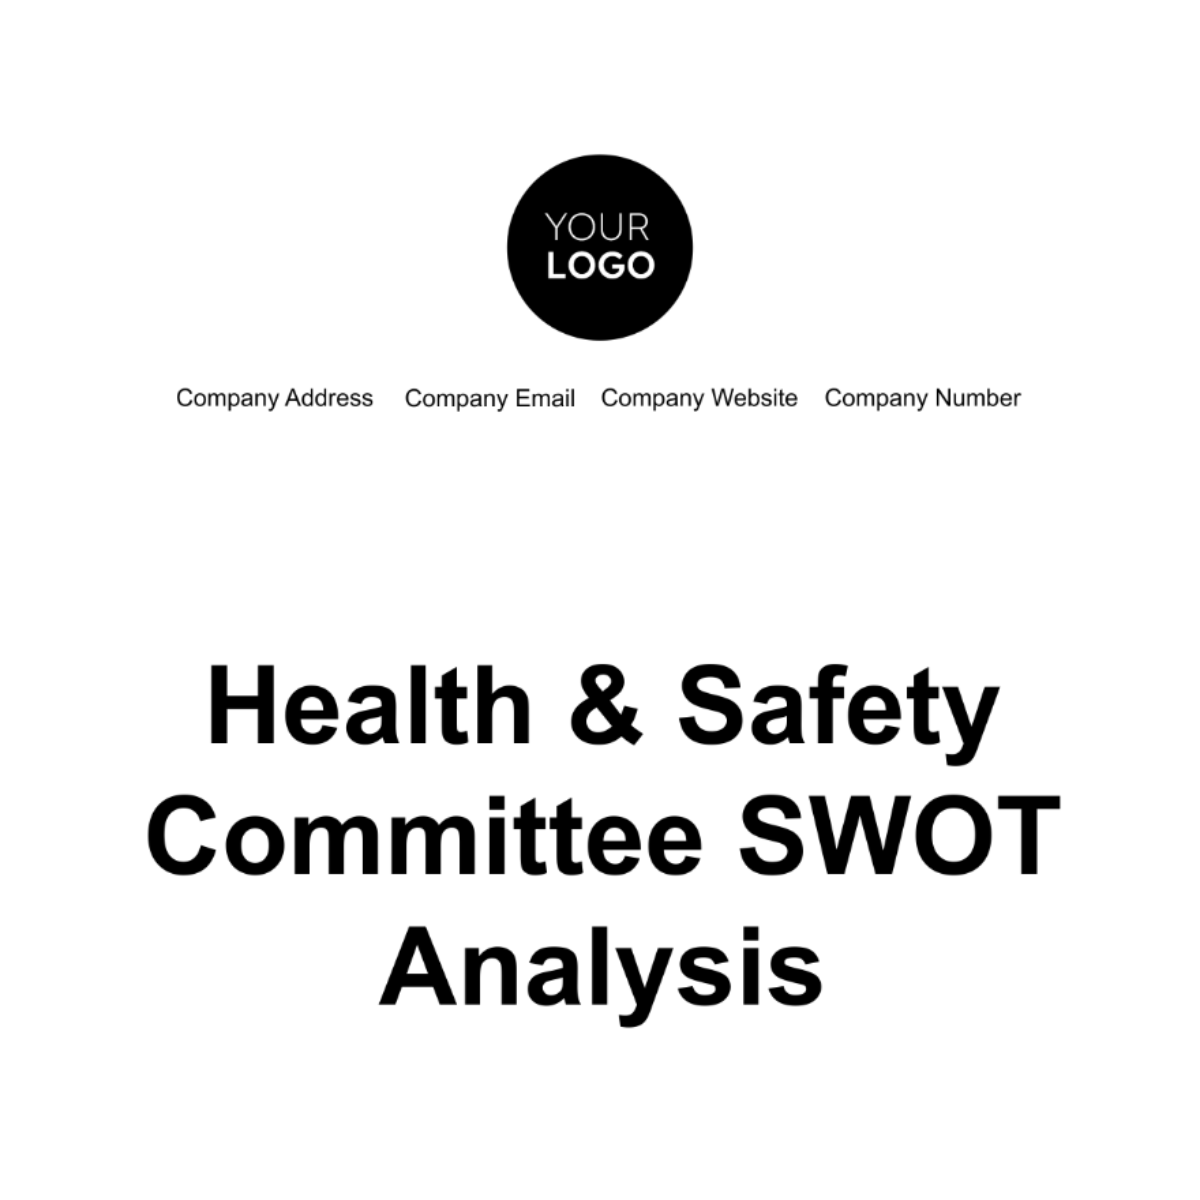 Health & Safety Committee SWOT Analysis Template